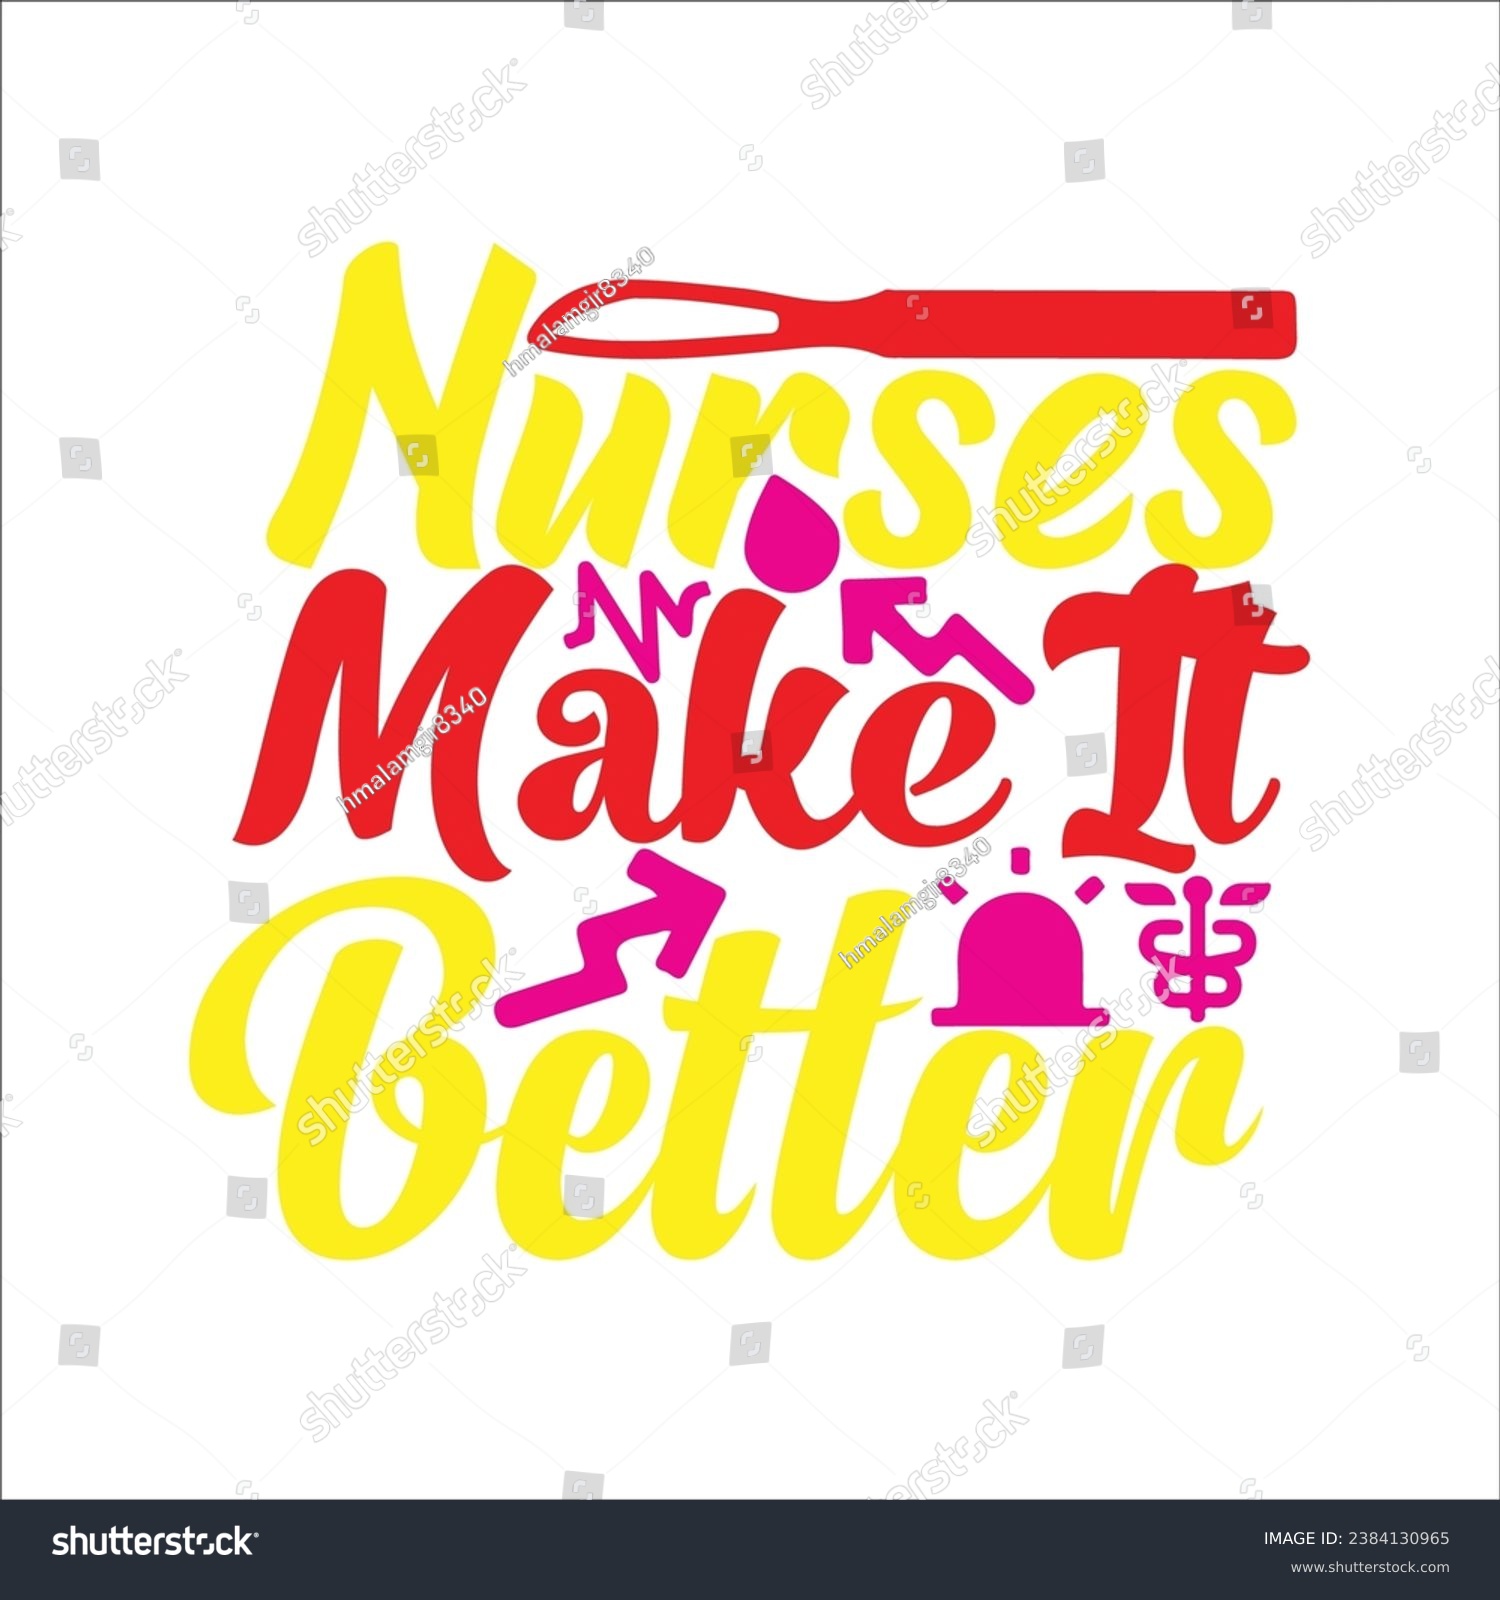 SVG of Nurses make It Better 1 t-shirt design. Here You Can find and Buy t-Shirt Design. Digital Files for yourself, friends and family, or anyone who supports your Special Day and Occasions. svg